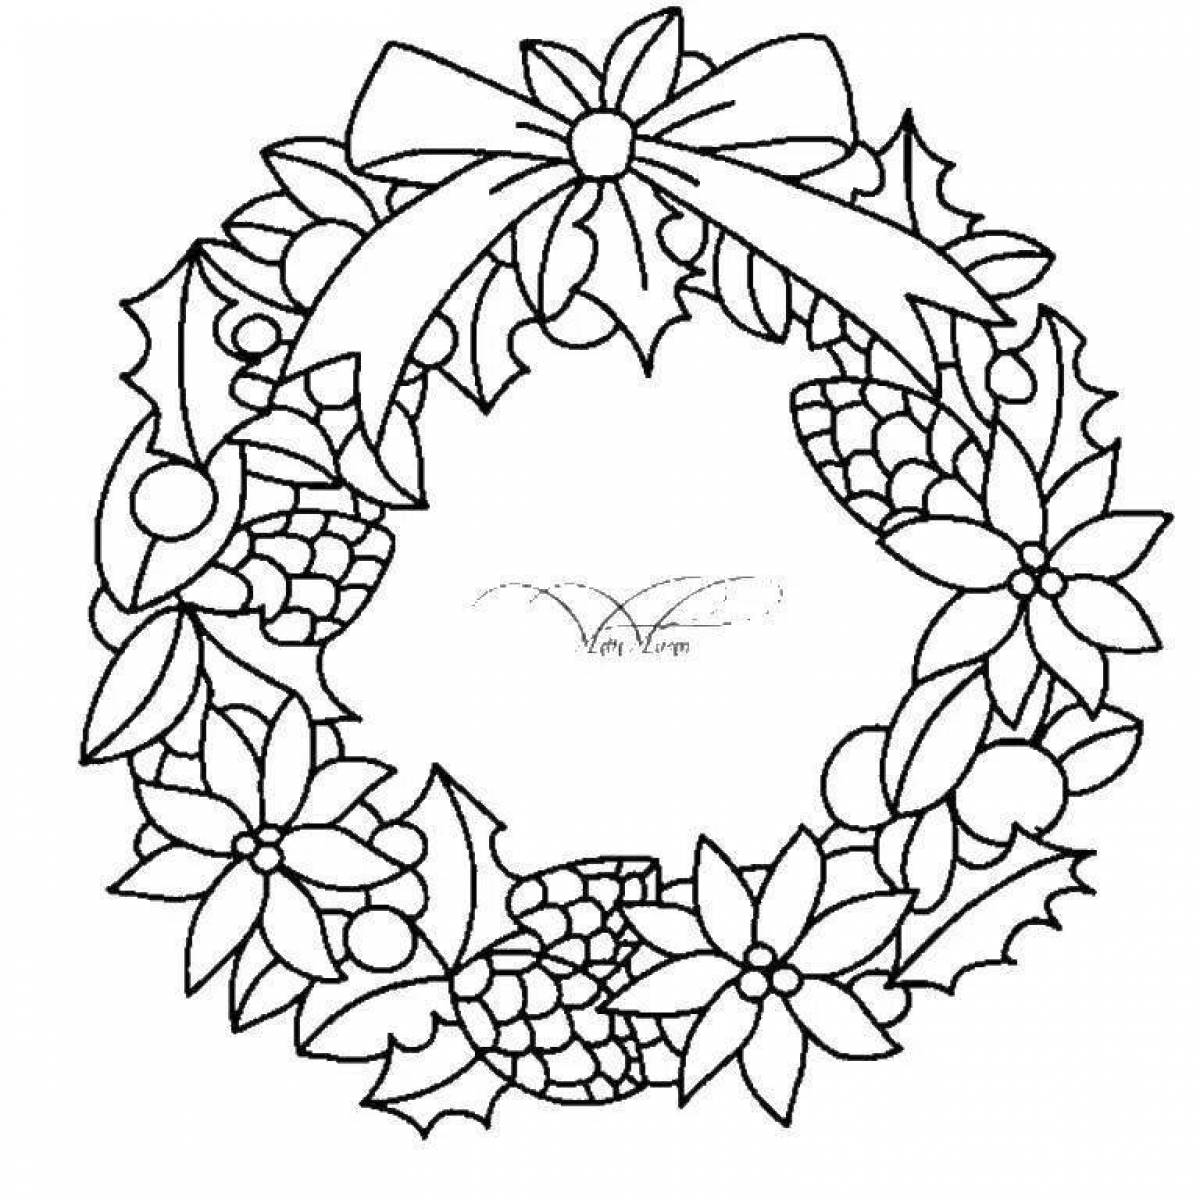 Coloring wreath of peace